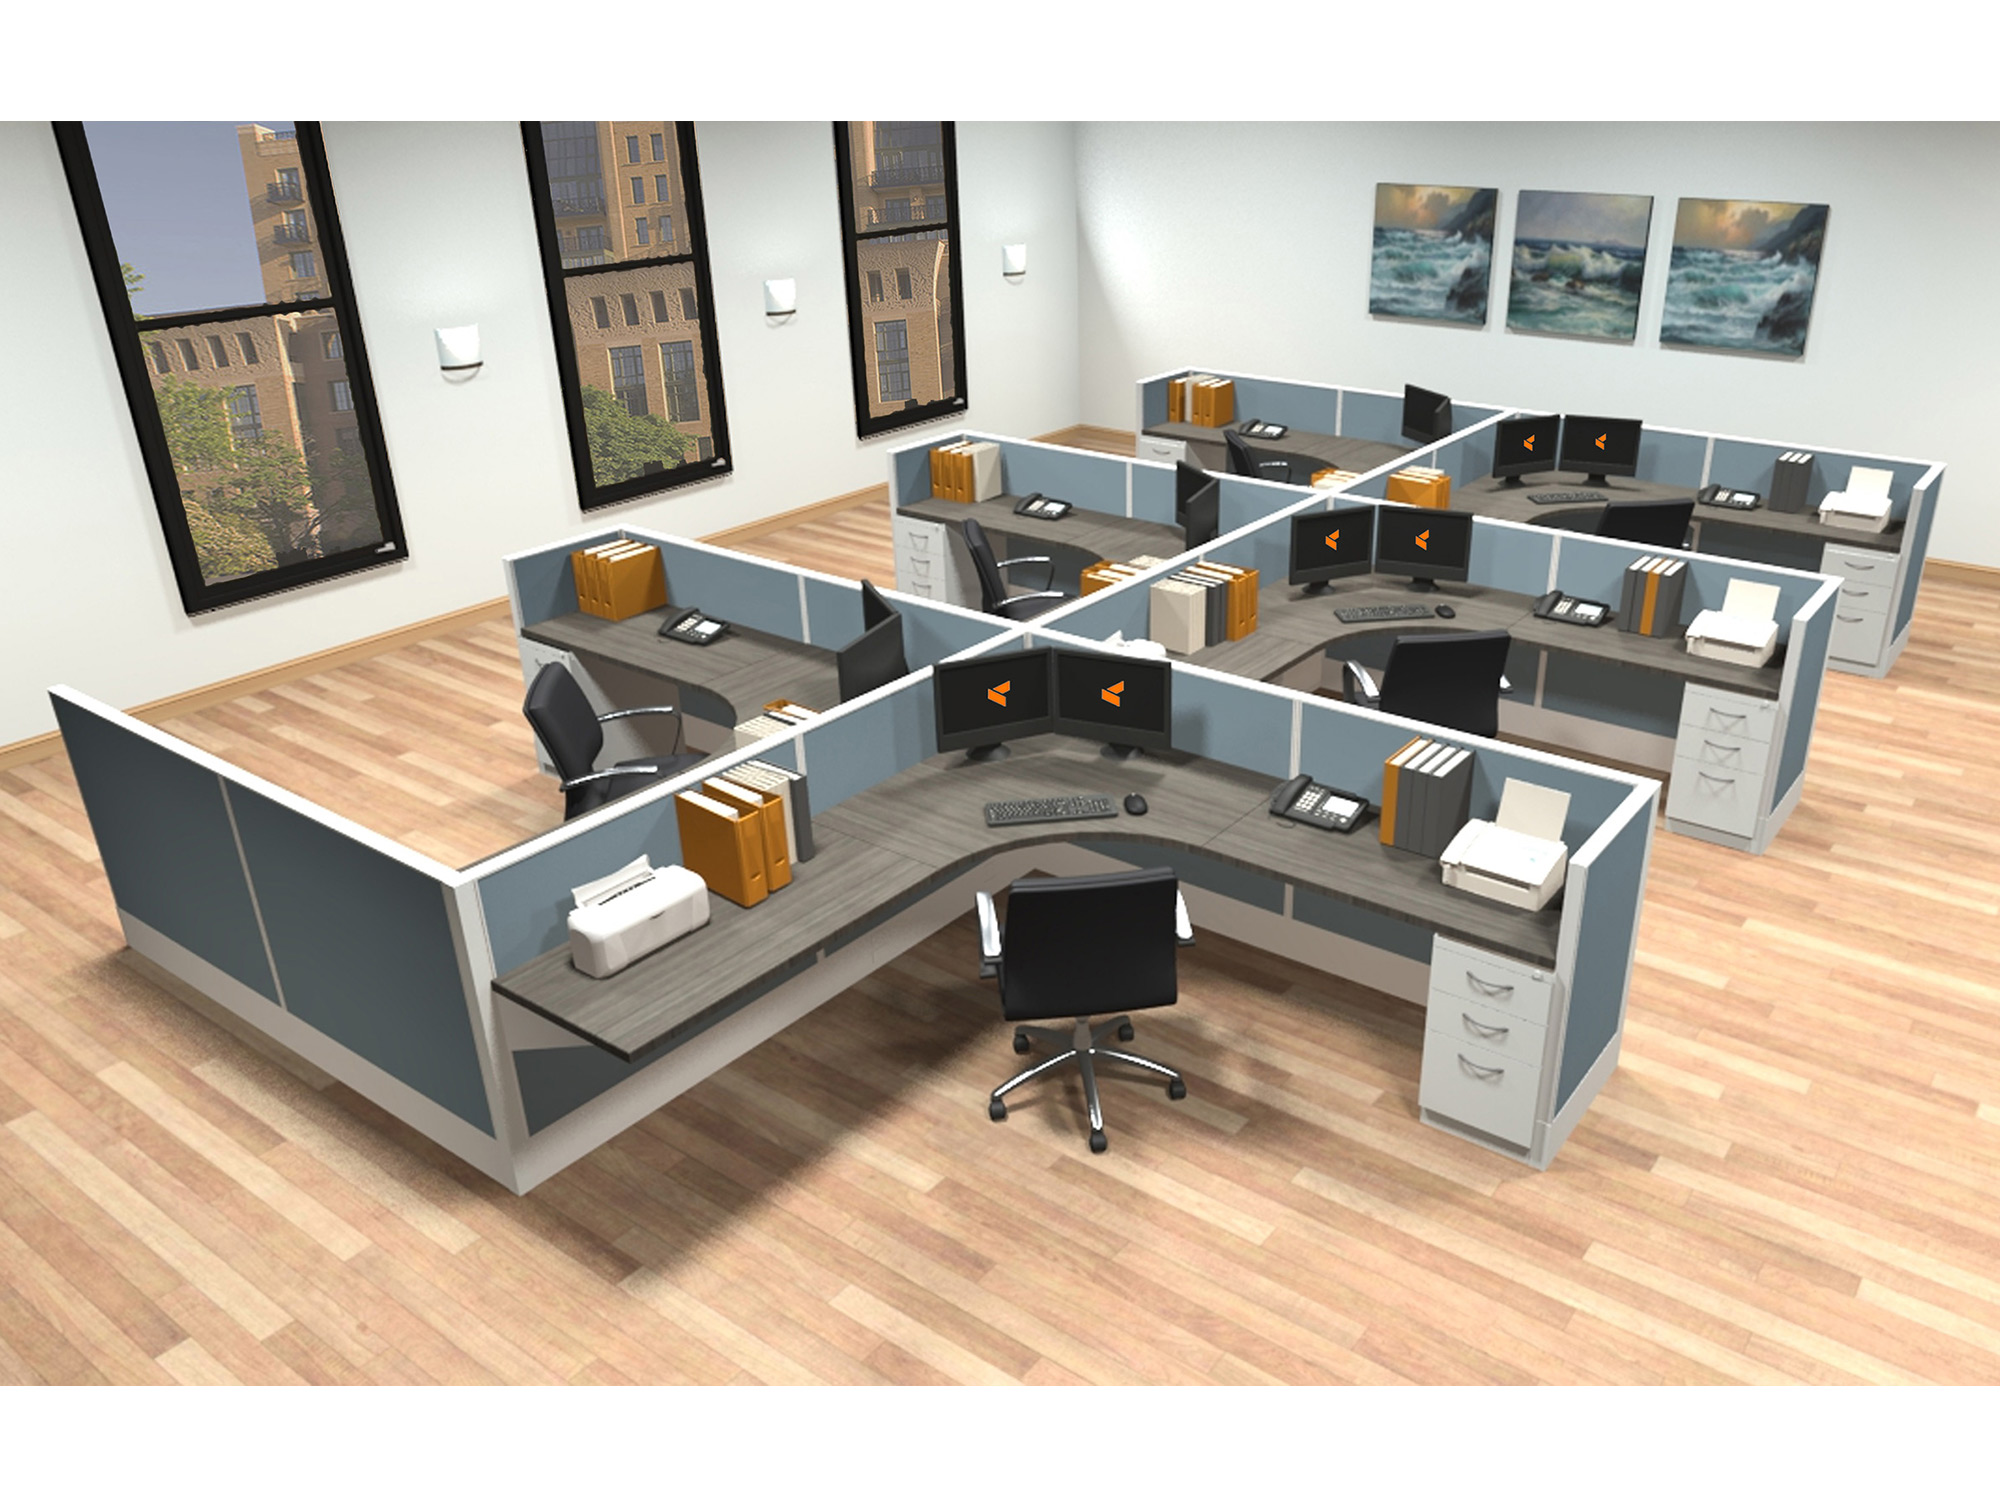 8x8 modular workstations from AIS - 6 Pack Cluster